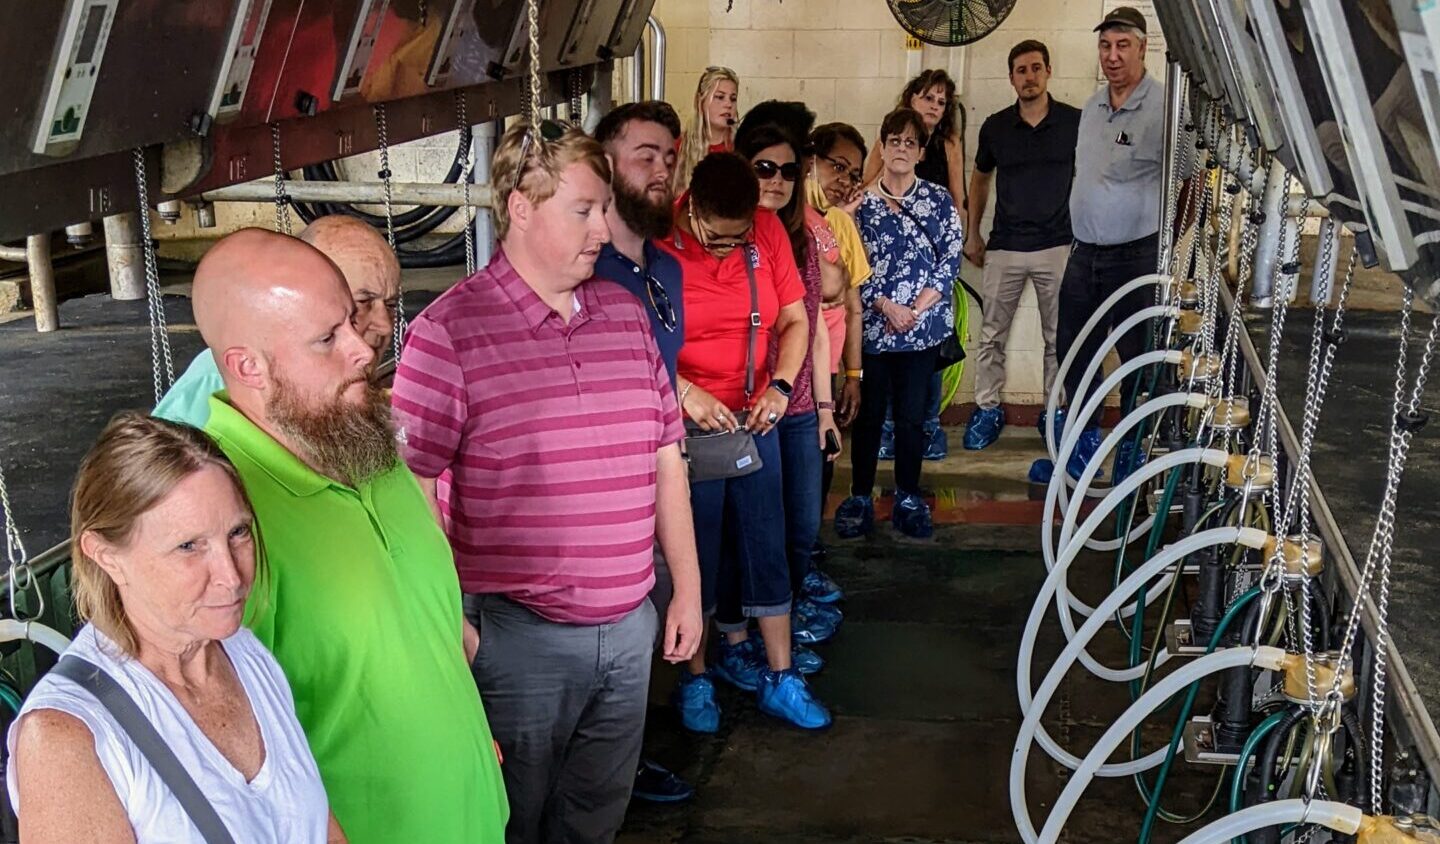 OIT staff members learn about the facility equipment at the Howling Cow Tour.